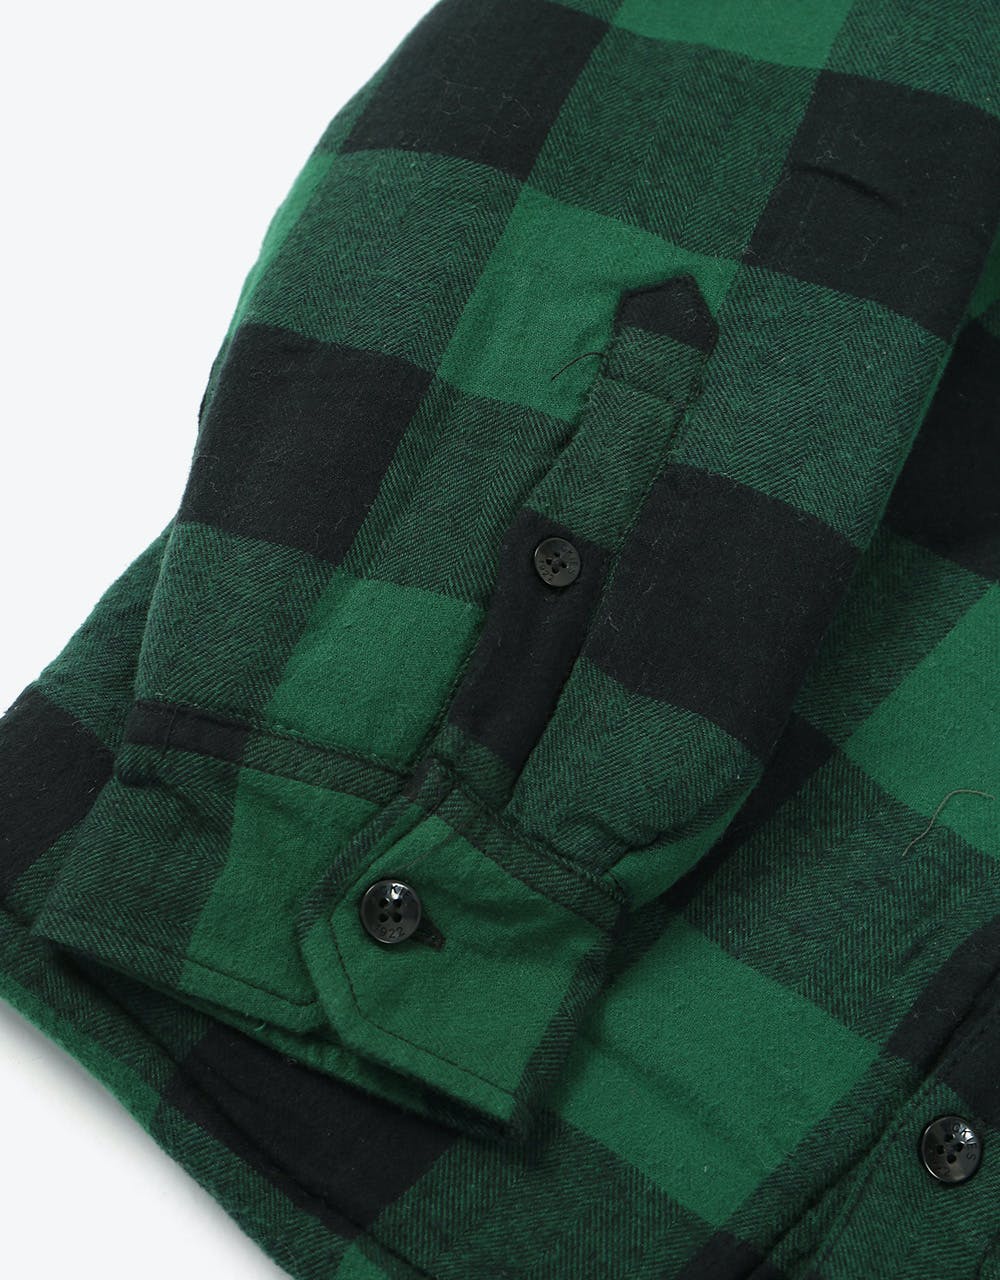 Dickies Lansdale L/S Sherpa Lined Shirt - Pine Green